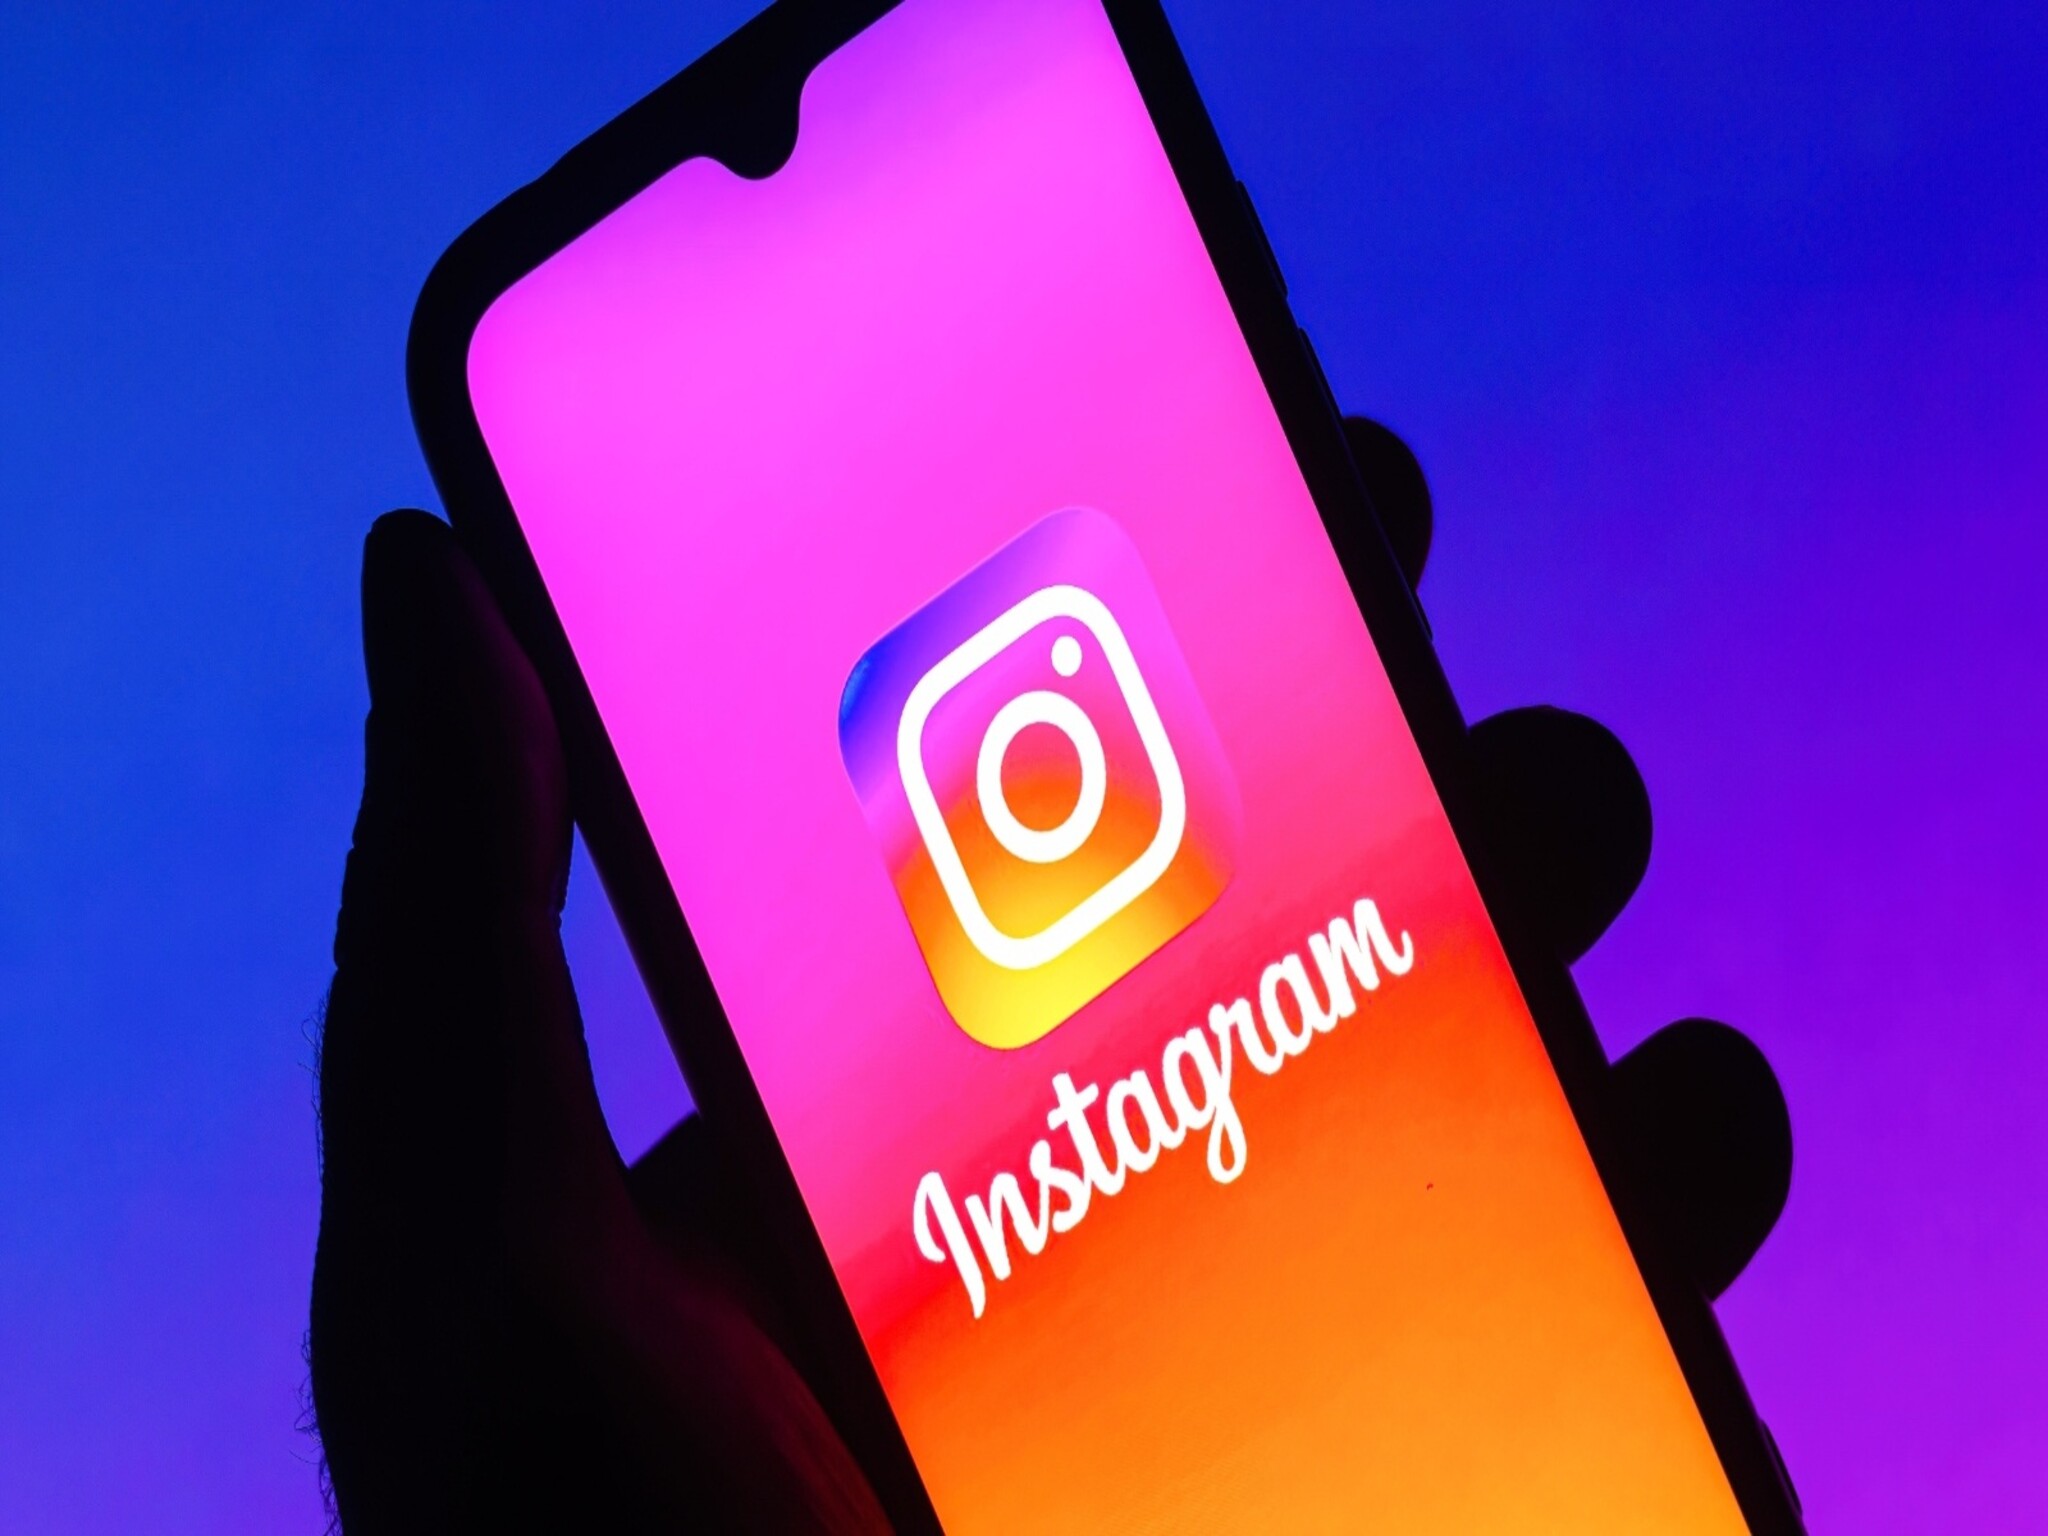 A new Instagram feature gives priority to close friends